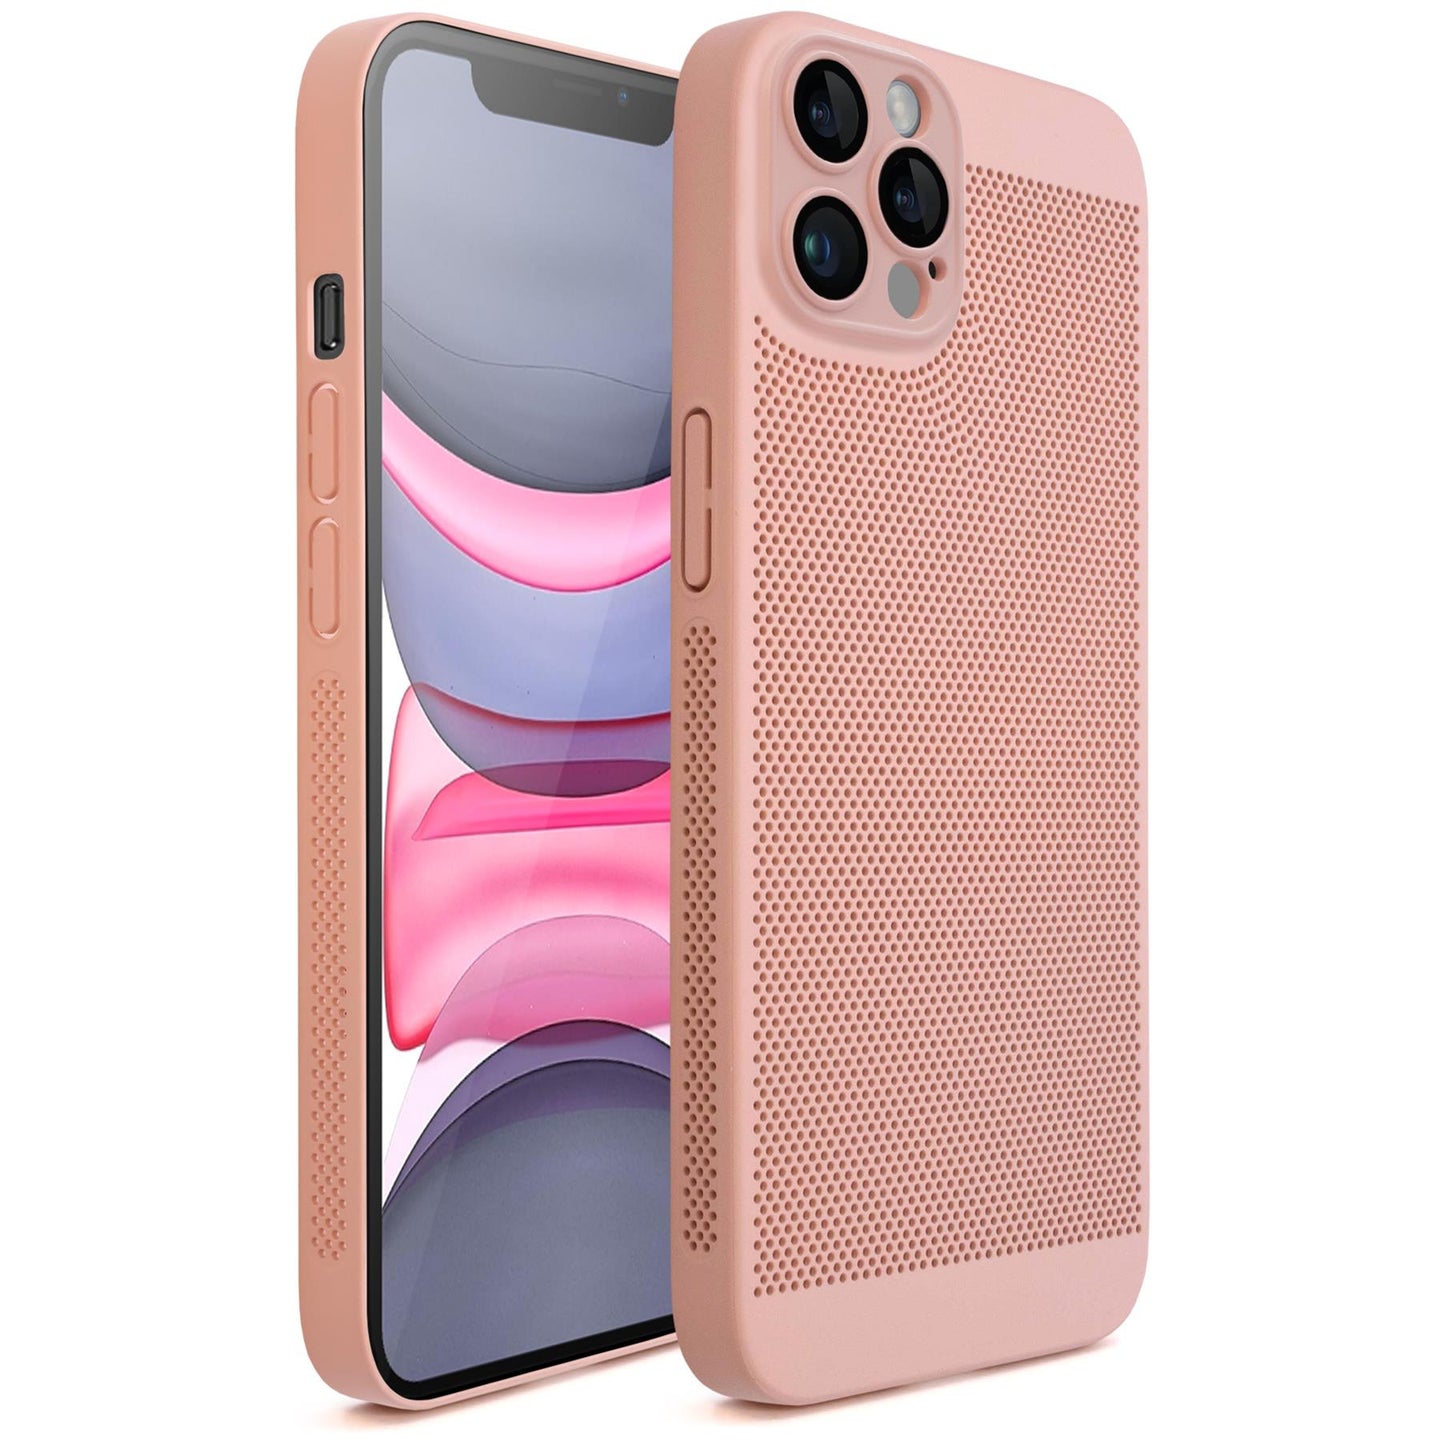 Moozy VentiGuard Phone Case for iPhone 12 Pro, Pastel Pink, 6.1-inch - Breathable Cover with Perforated Pattern for Air Circulation, Ventilation, Anti-Overheating Phone Case